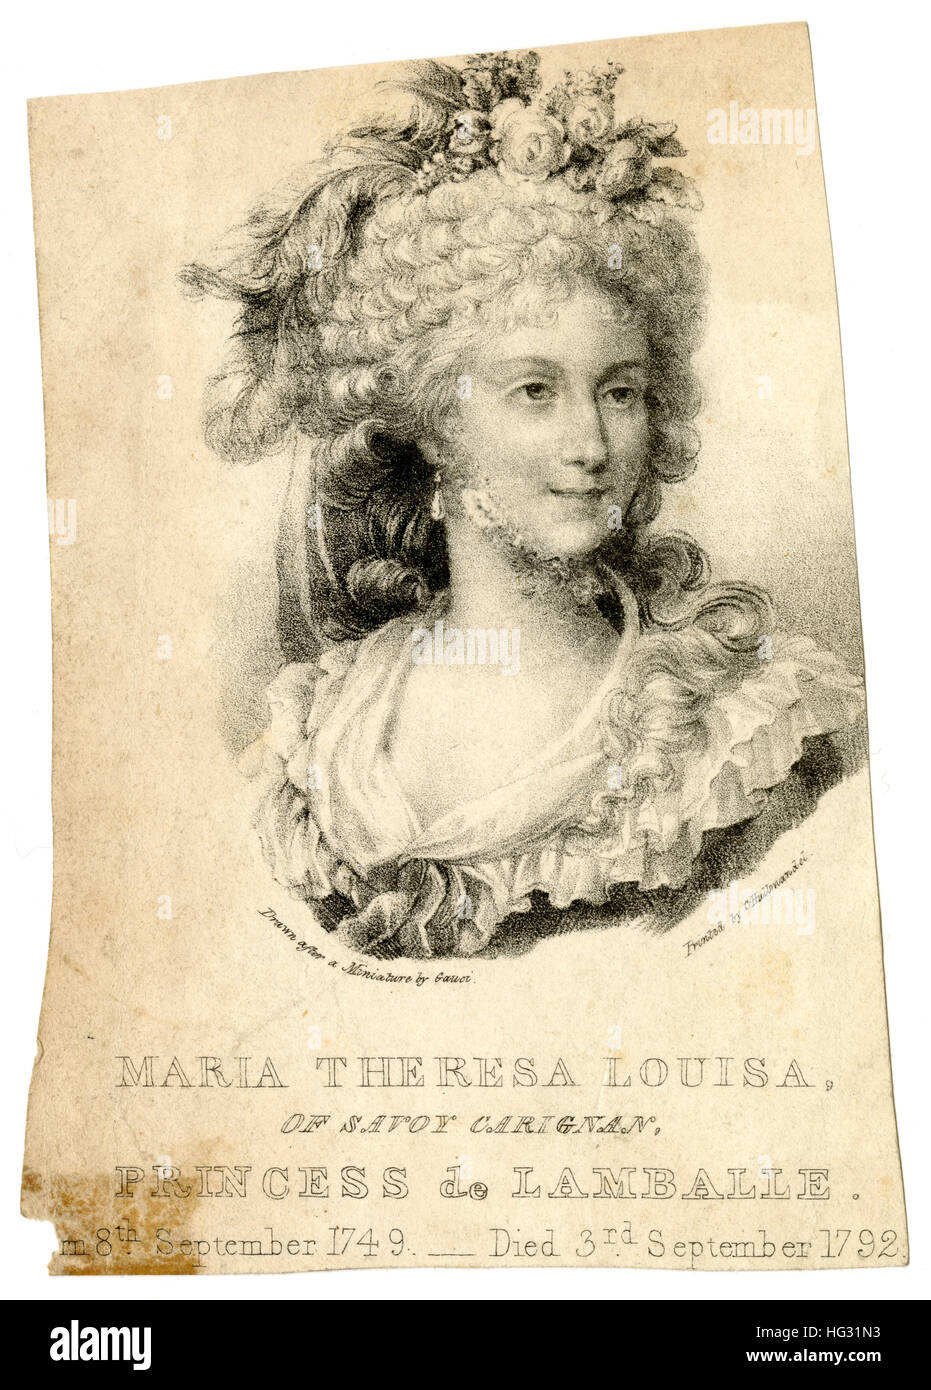 Antique c1840 engraving, Princess de Lamballe. Princess Marie-Louise Thérèse of Savoy-Carignan (1749-1792) was a member of a cadet branch of the House of Savoy. SOURCE: ORIGINAL ENGRAVING. Stock Photo